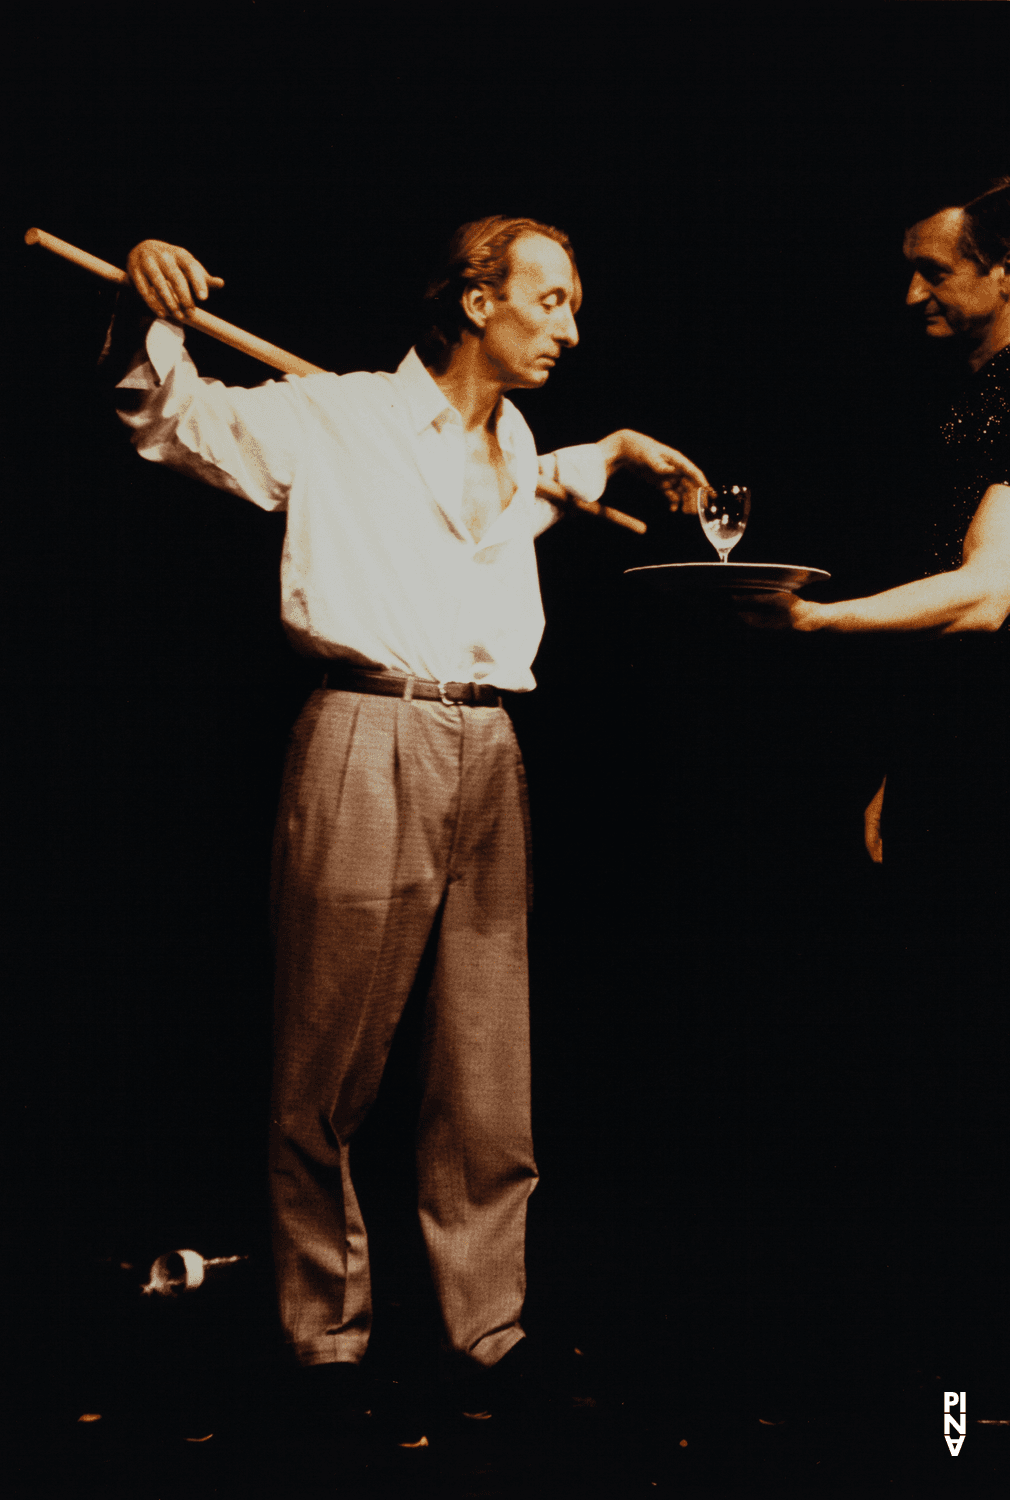 Dominique Mercy and Jan Minařík in “Nur Du (Only You)” by Pina Bausch